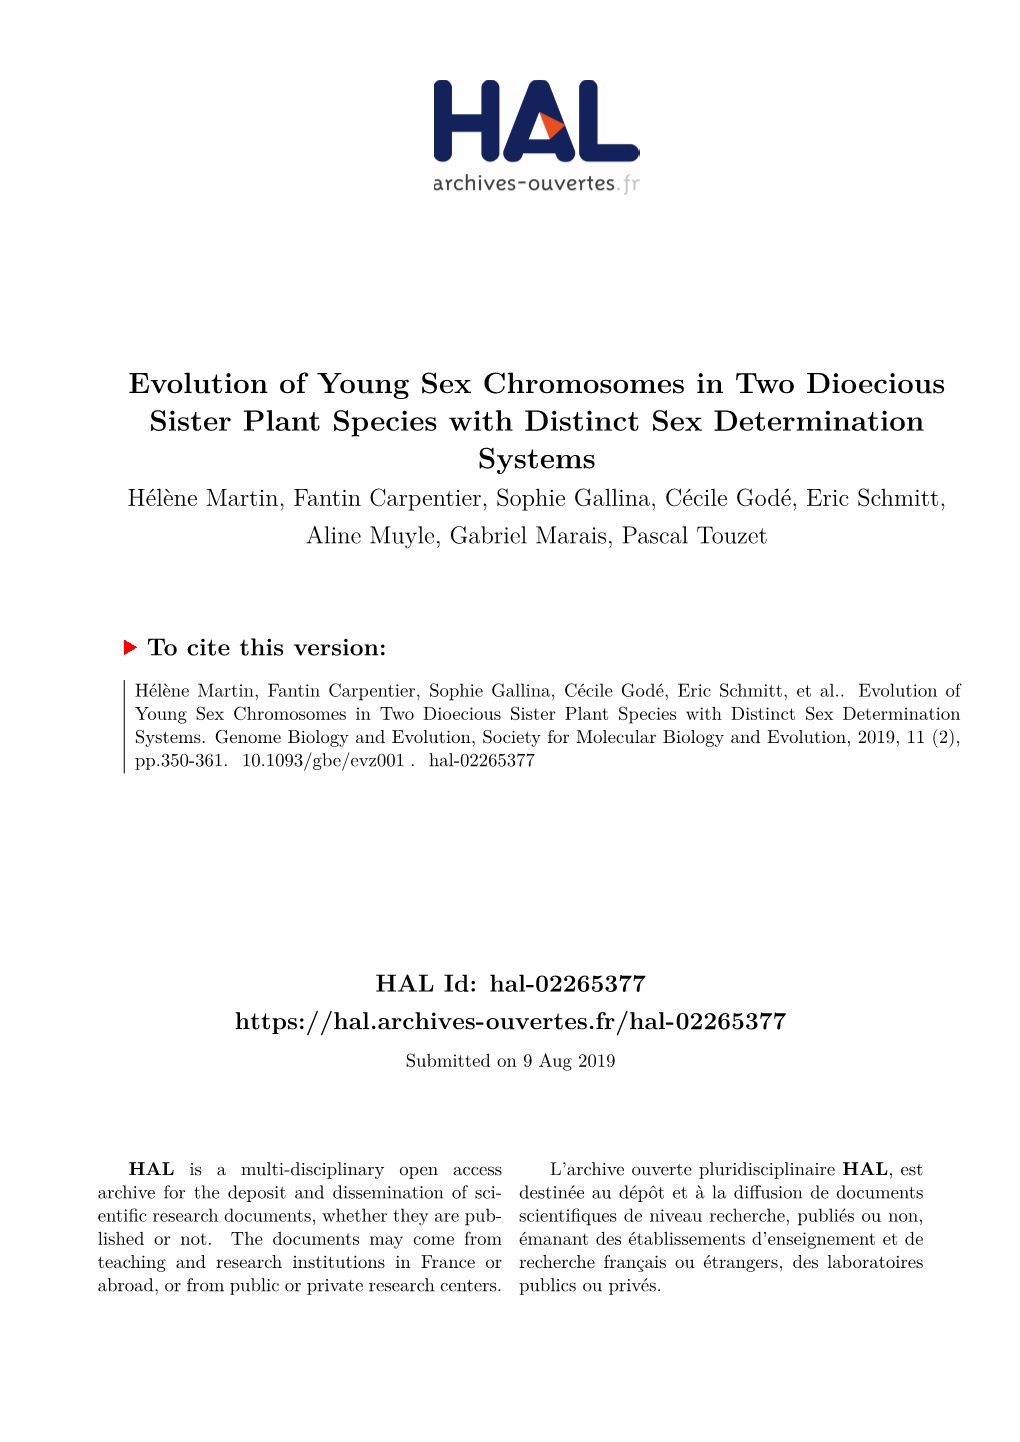 Evolution of Young Sex Chromosomes in Two Dioecious